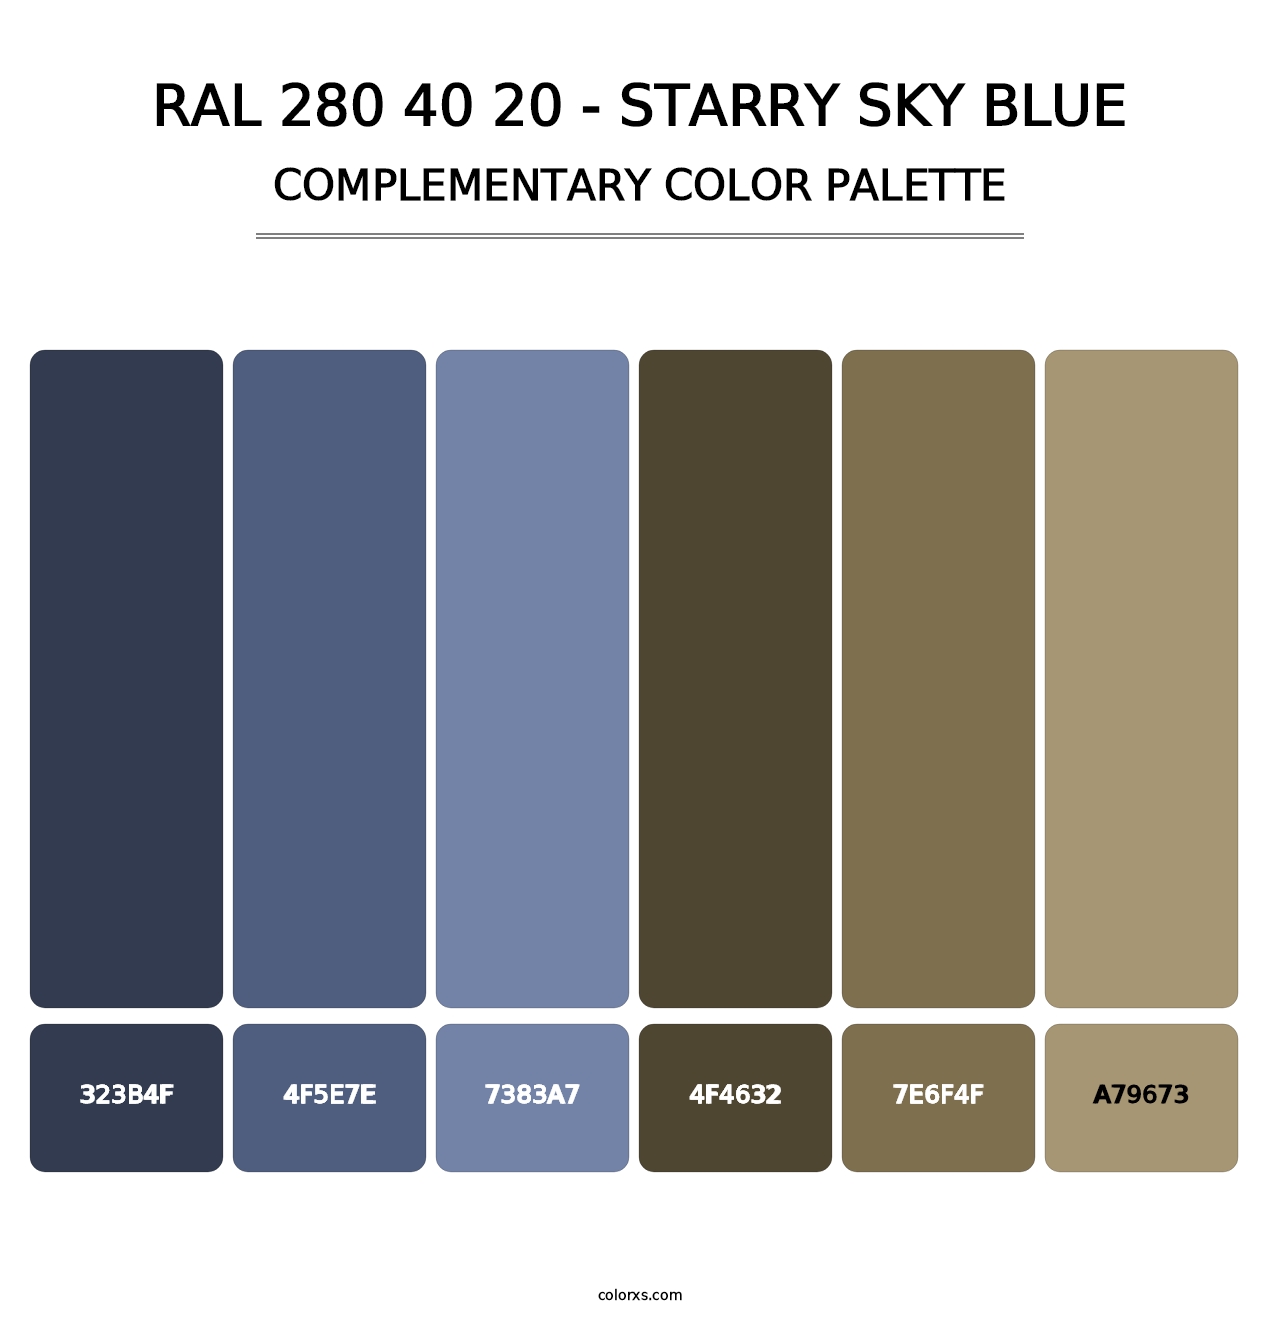 RAL 280 40 20 - Starry Sky Blue - Complementary Color Palette